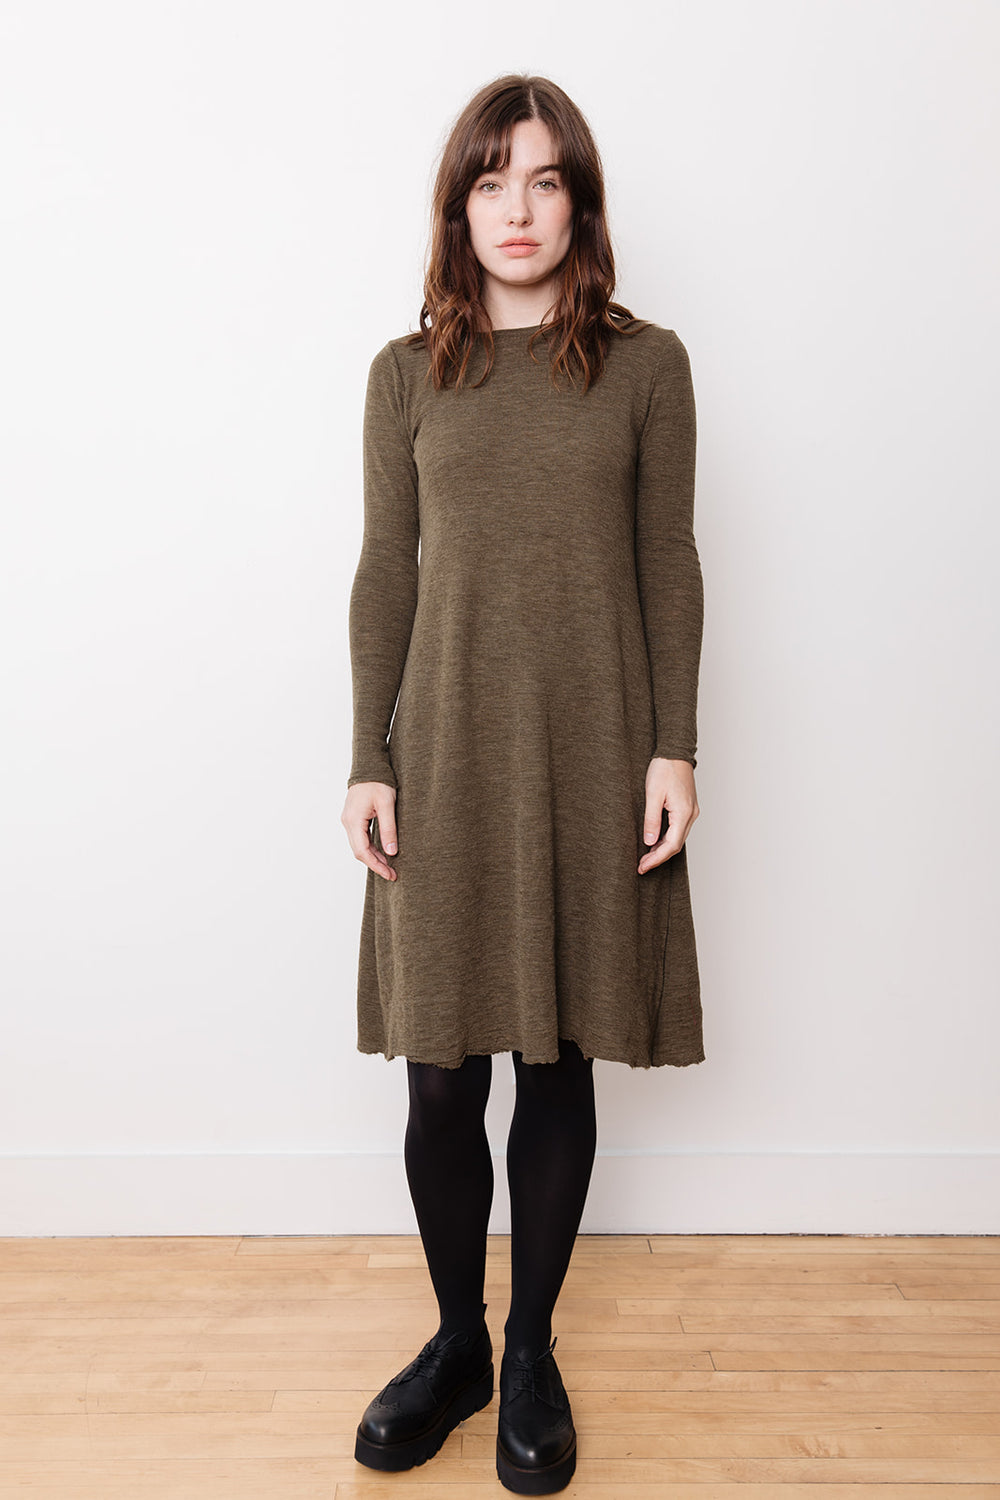 Wool A-Line Dress, Capers